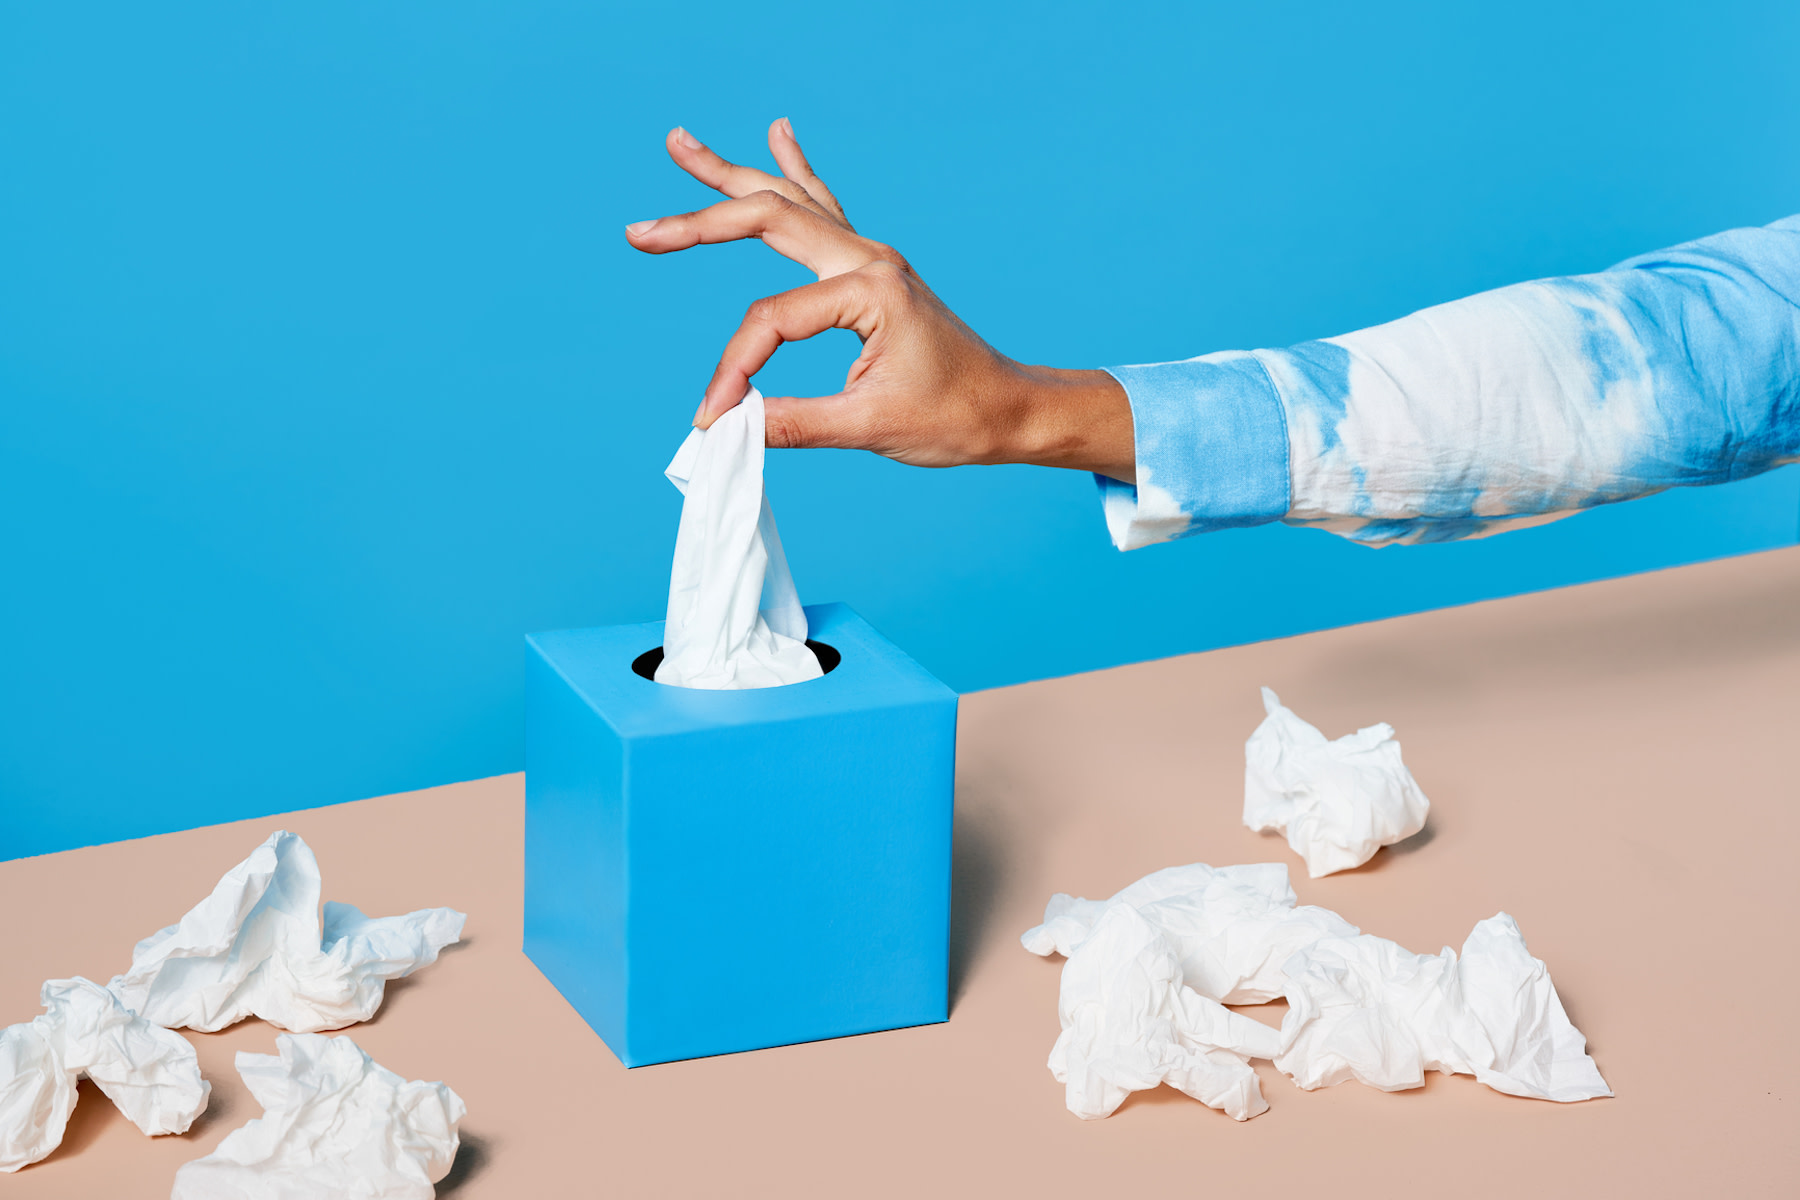 In this image for an article about whether or not you should exercise when you're sick, a hand in a blue and white tie-dye jacket is plucking a tissue from a tissue box. There are used tissues lying around the tissue box on a cream table.